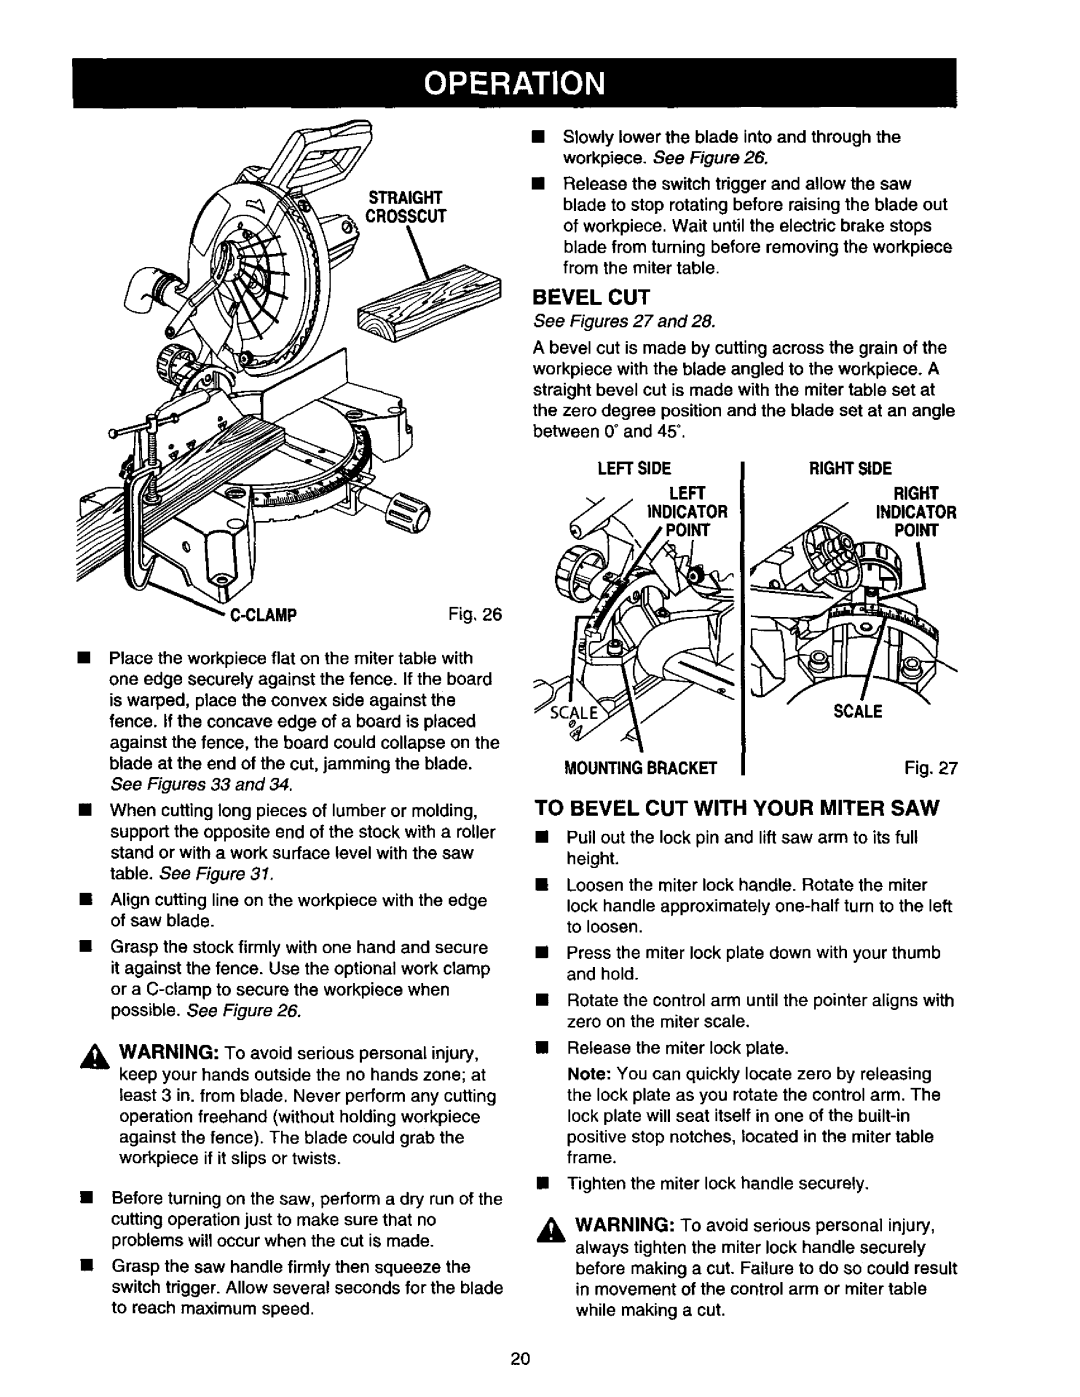 Craftsman 315.21213 manual To Bevel Cut With Your Miter Saw, See Figures 27 and 